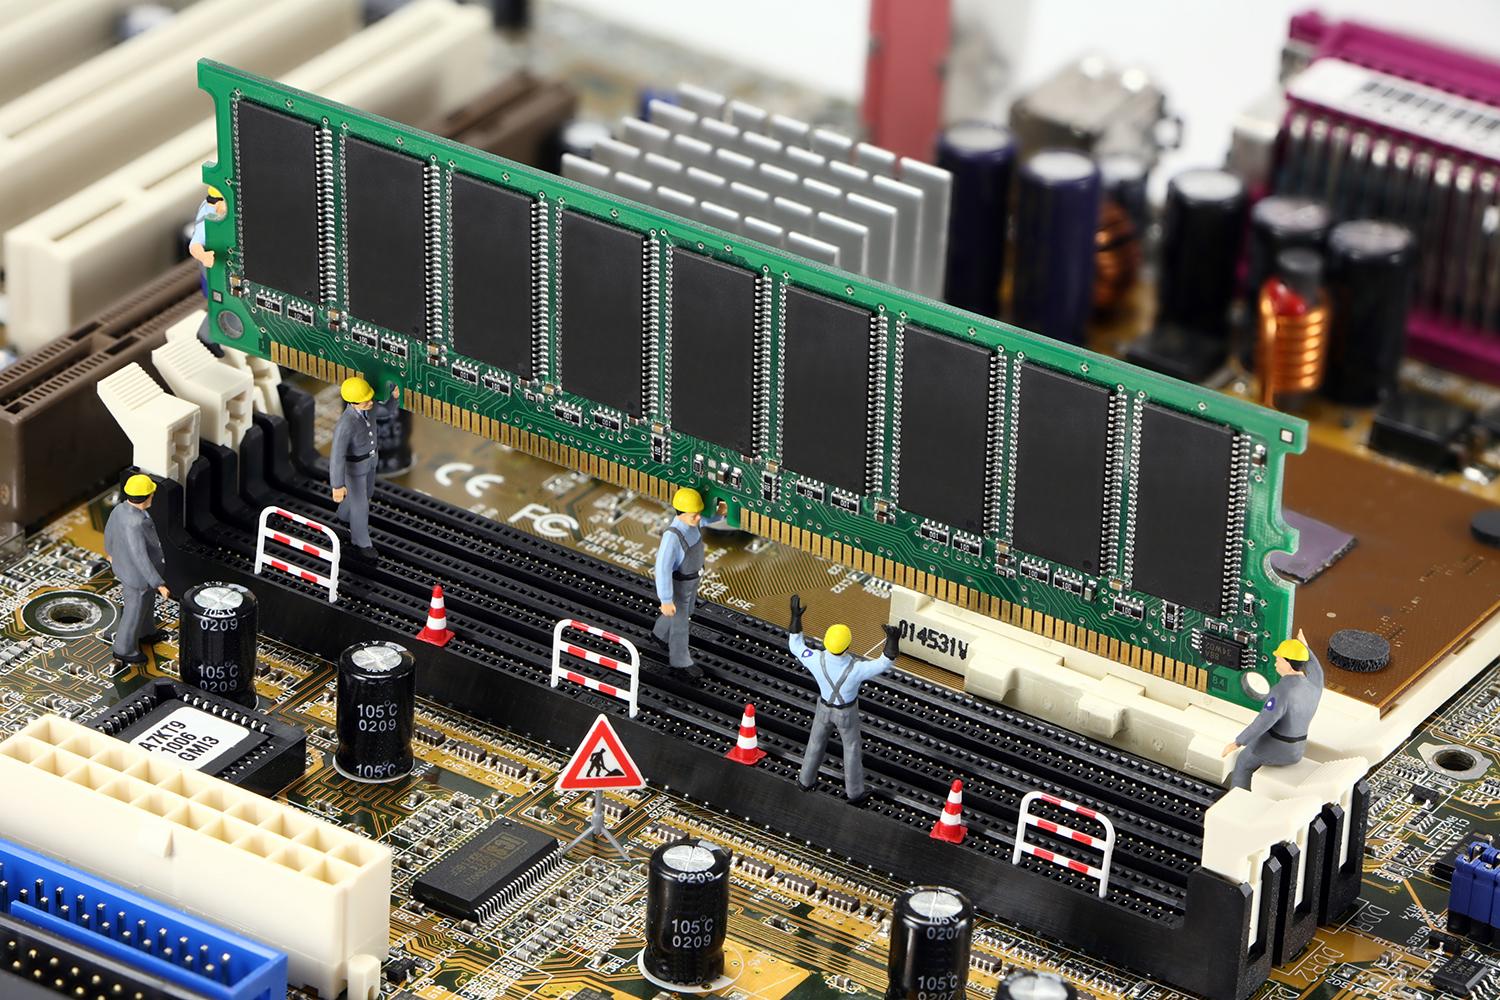 Should you upgrade your RAM? 5 things to consider